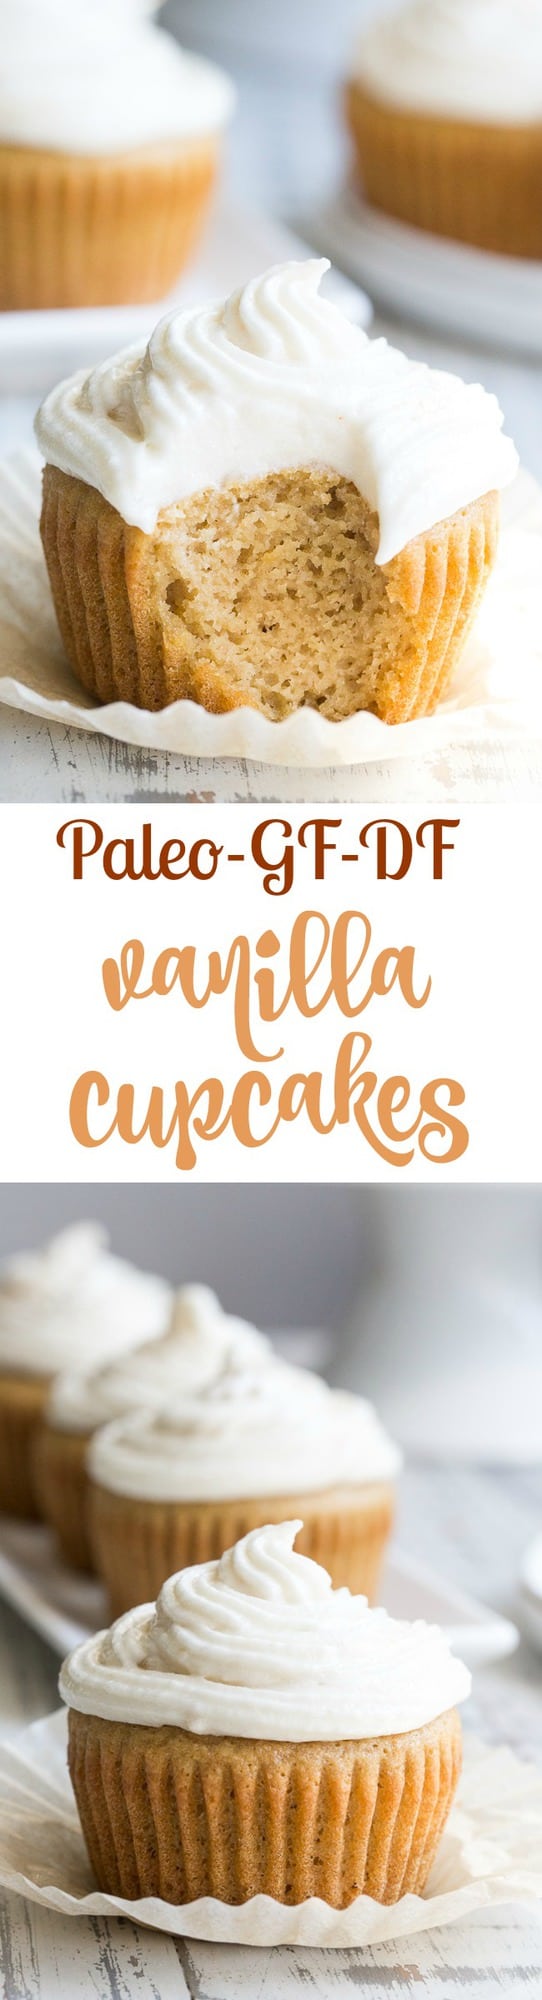 These paleo vanilla cupcakes are so light, fluffy, moist, and sweet that you'd never guess they're gluten free, dairy free and paleo!  The "buttercream" frosting is easy to whip up, and tastes just like the original even though it contains no refined sugar or dairy.  Kid approved and perfect for birthdays, special events, or "just because"!